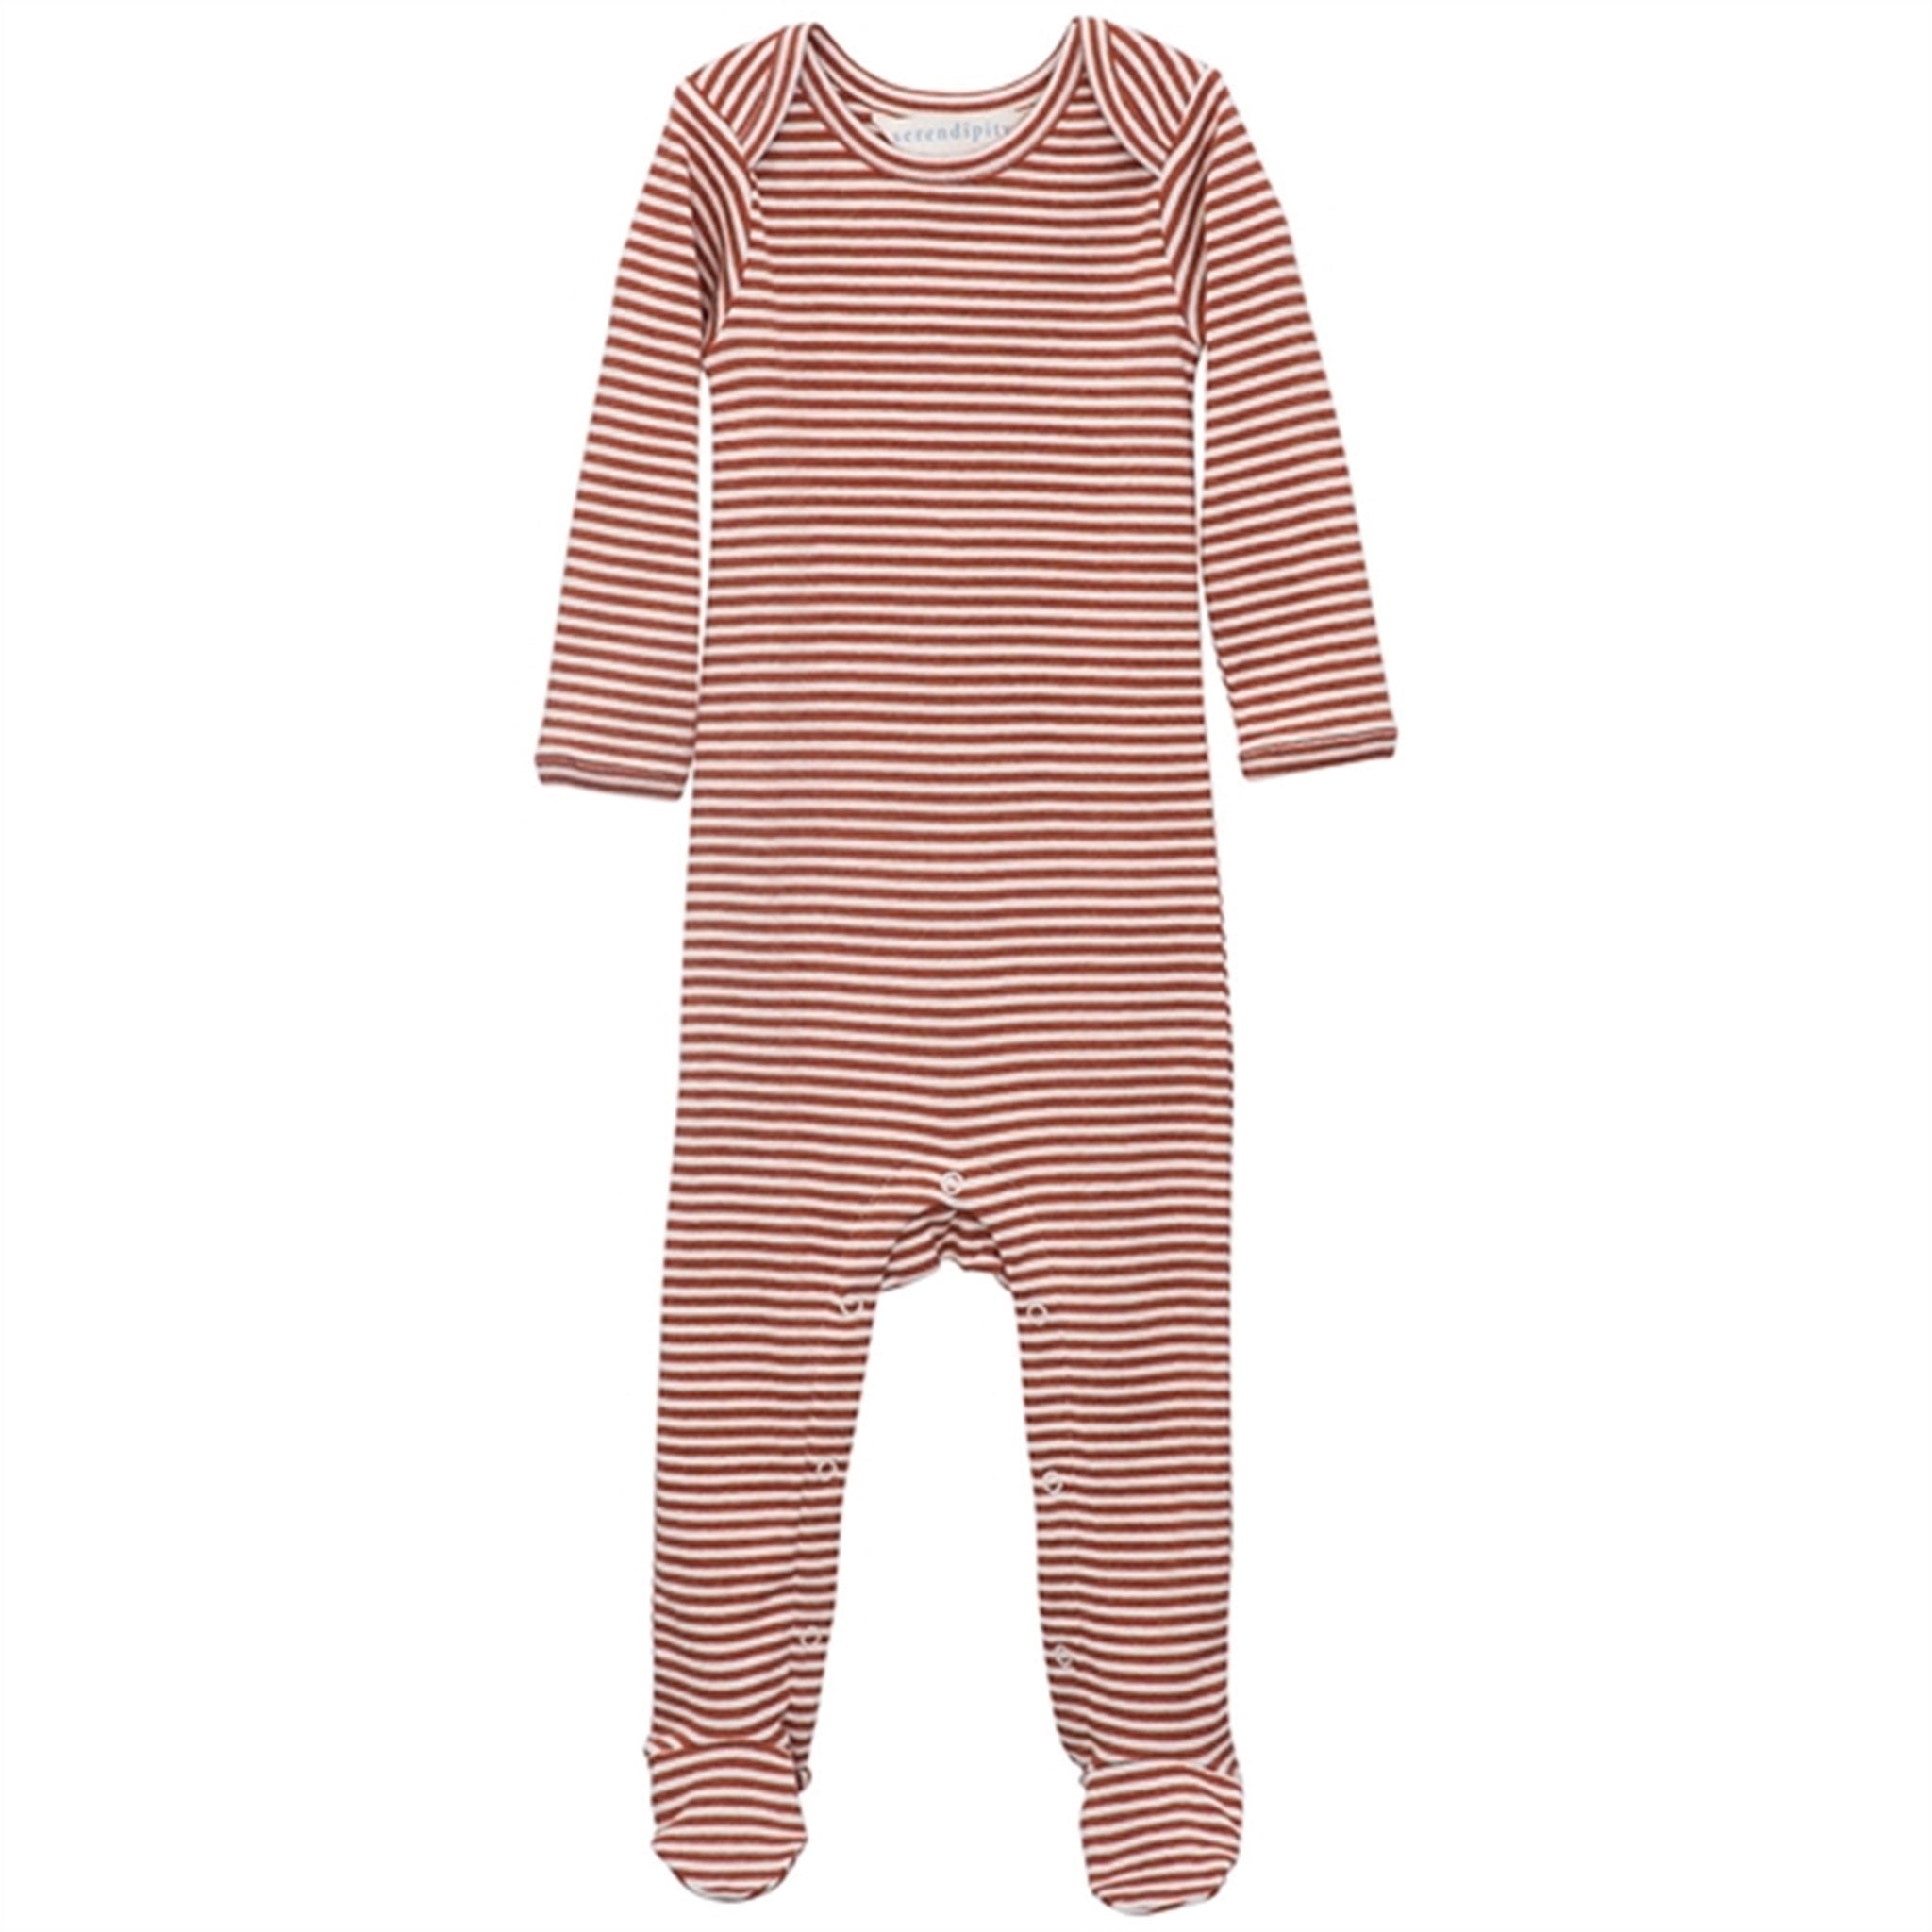 Serendipity Rust/Offwhite Baby Stripe Rib Body Suit